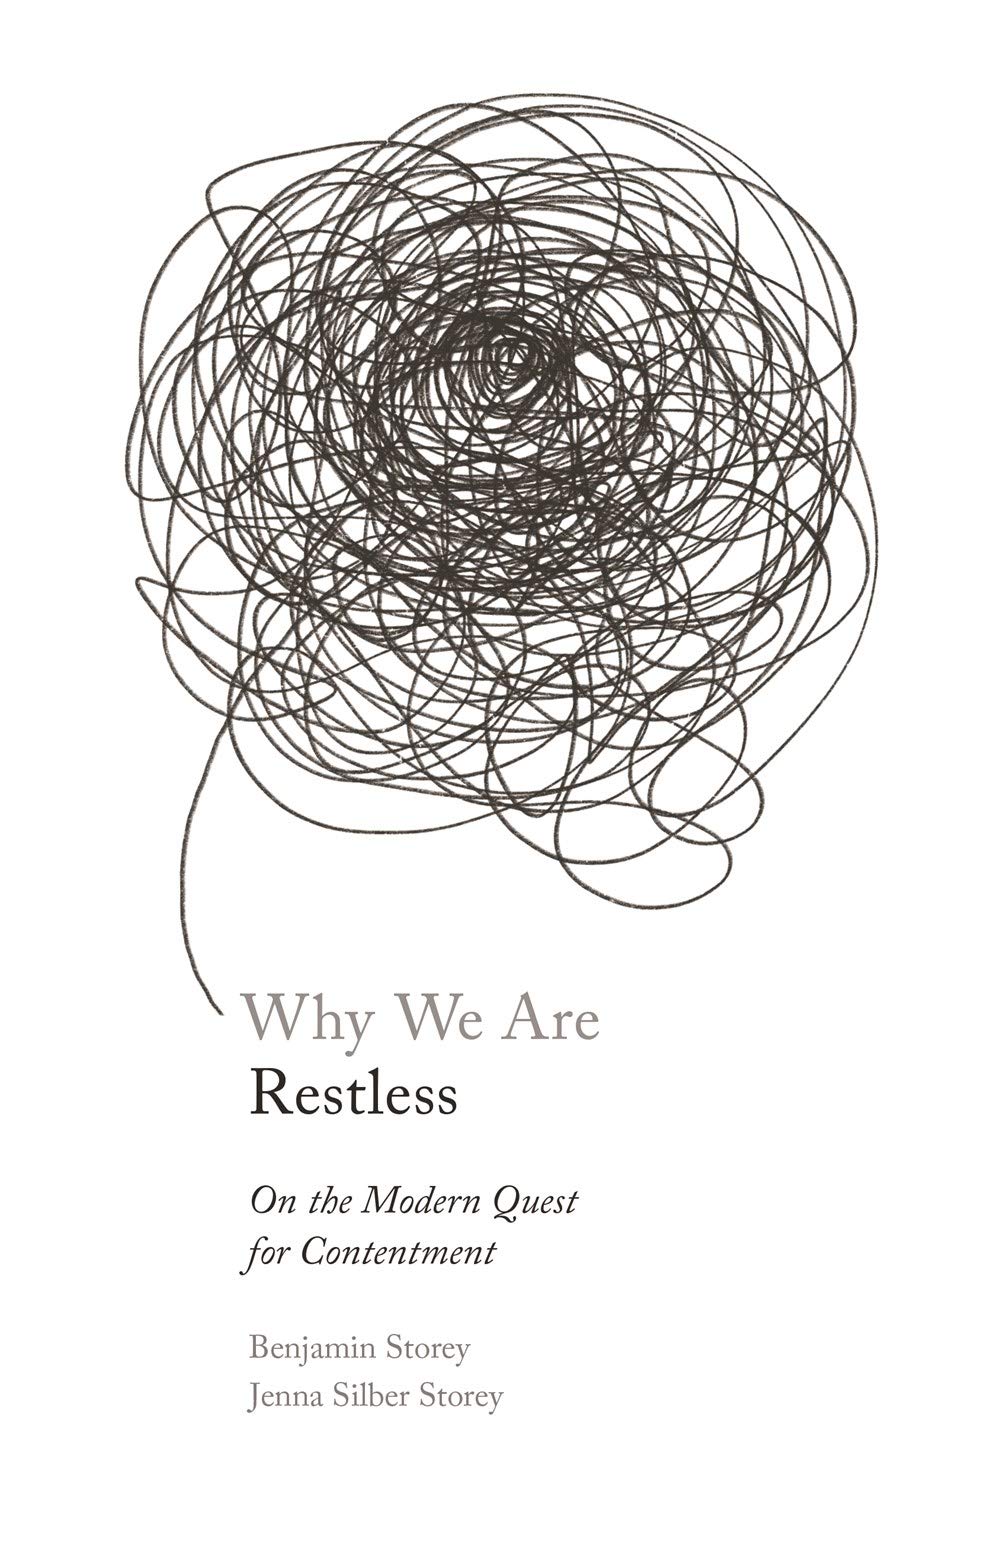 Podcast #701: Why Are We Restless?